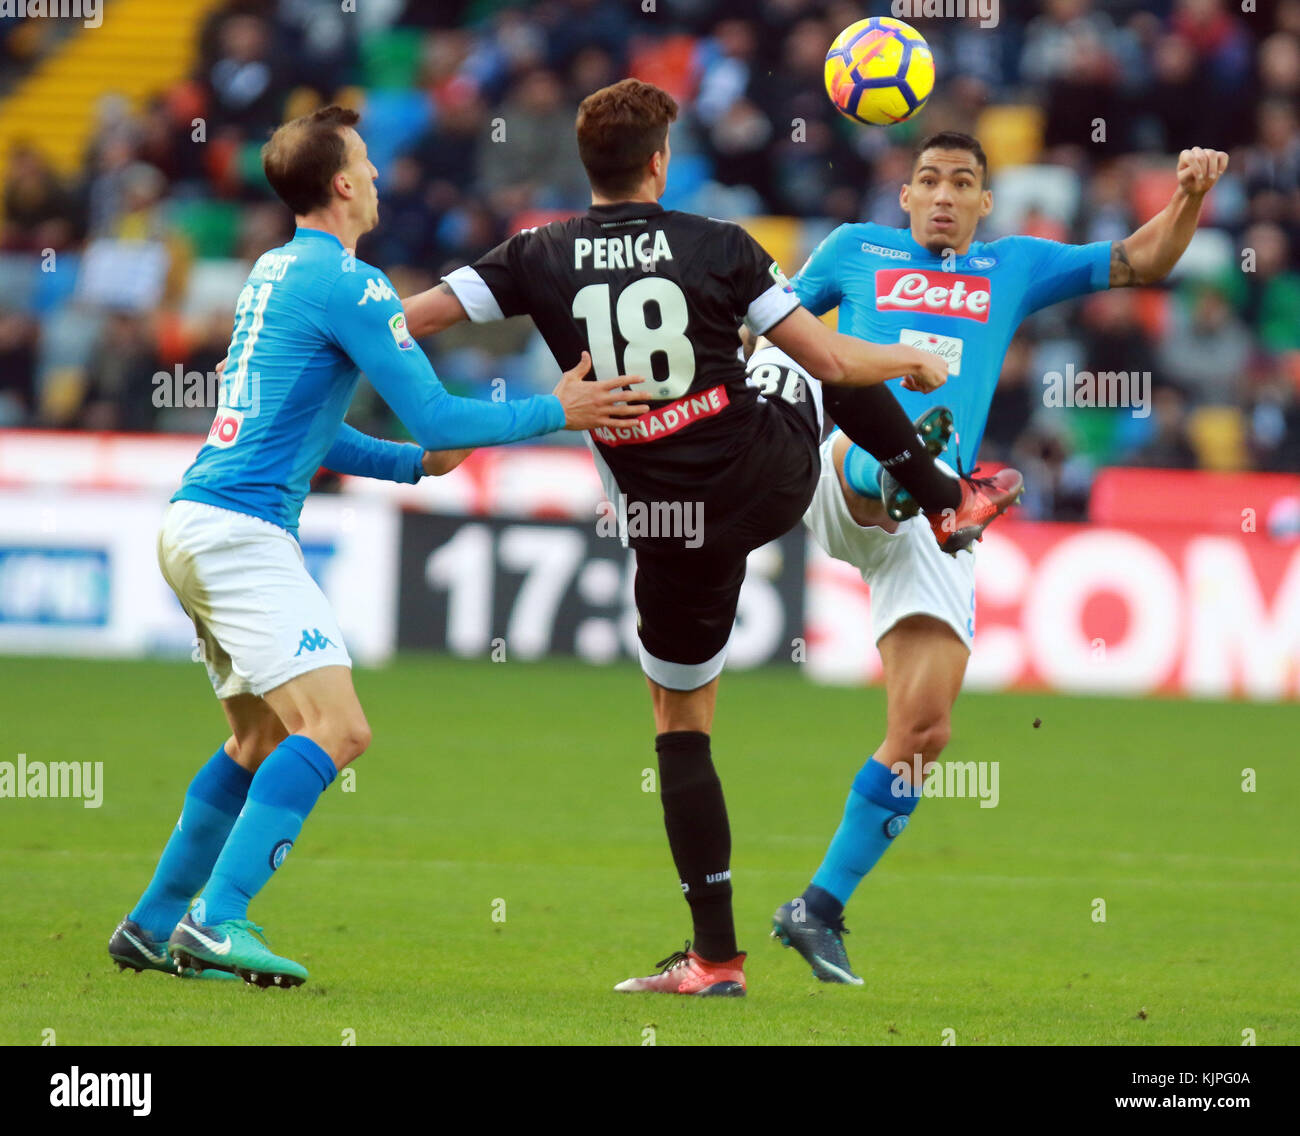 ITALY, Udine: Udinese's forward Stipe Perica (C) fights for the ball with Napoli's midfielder Allan (R) during the Serie A football match between Udinese Calcio v SSC Napoli at Dacia Arena Stadium on 26th November, 2017. Credit: Andrea Spinelli/Alamy Live News Stock Photo